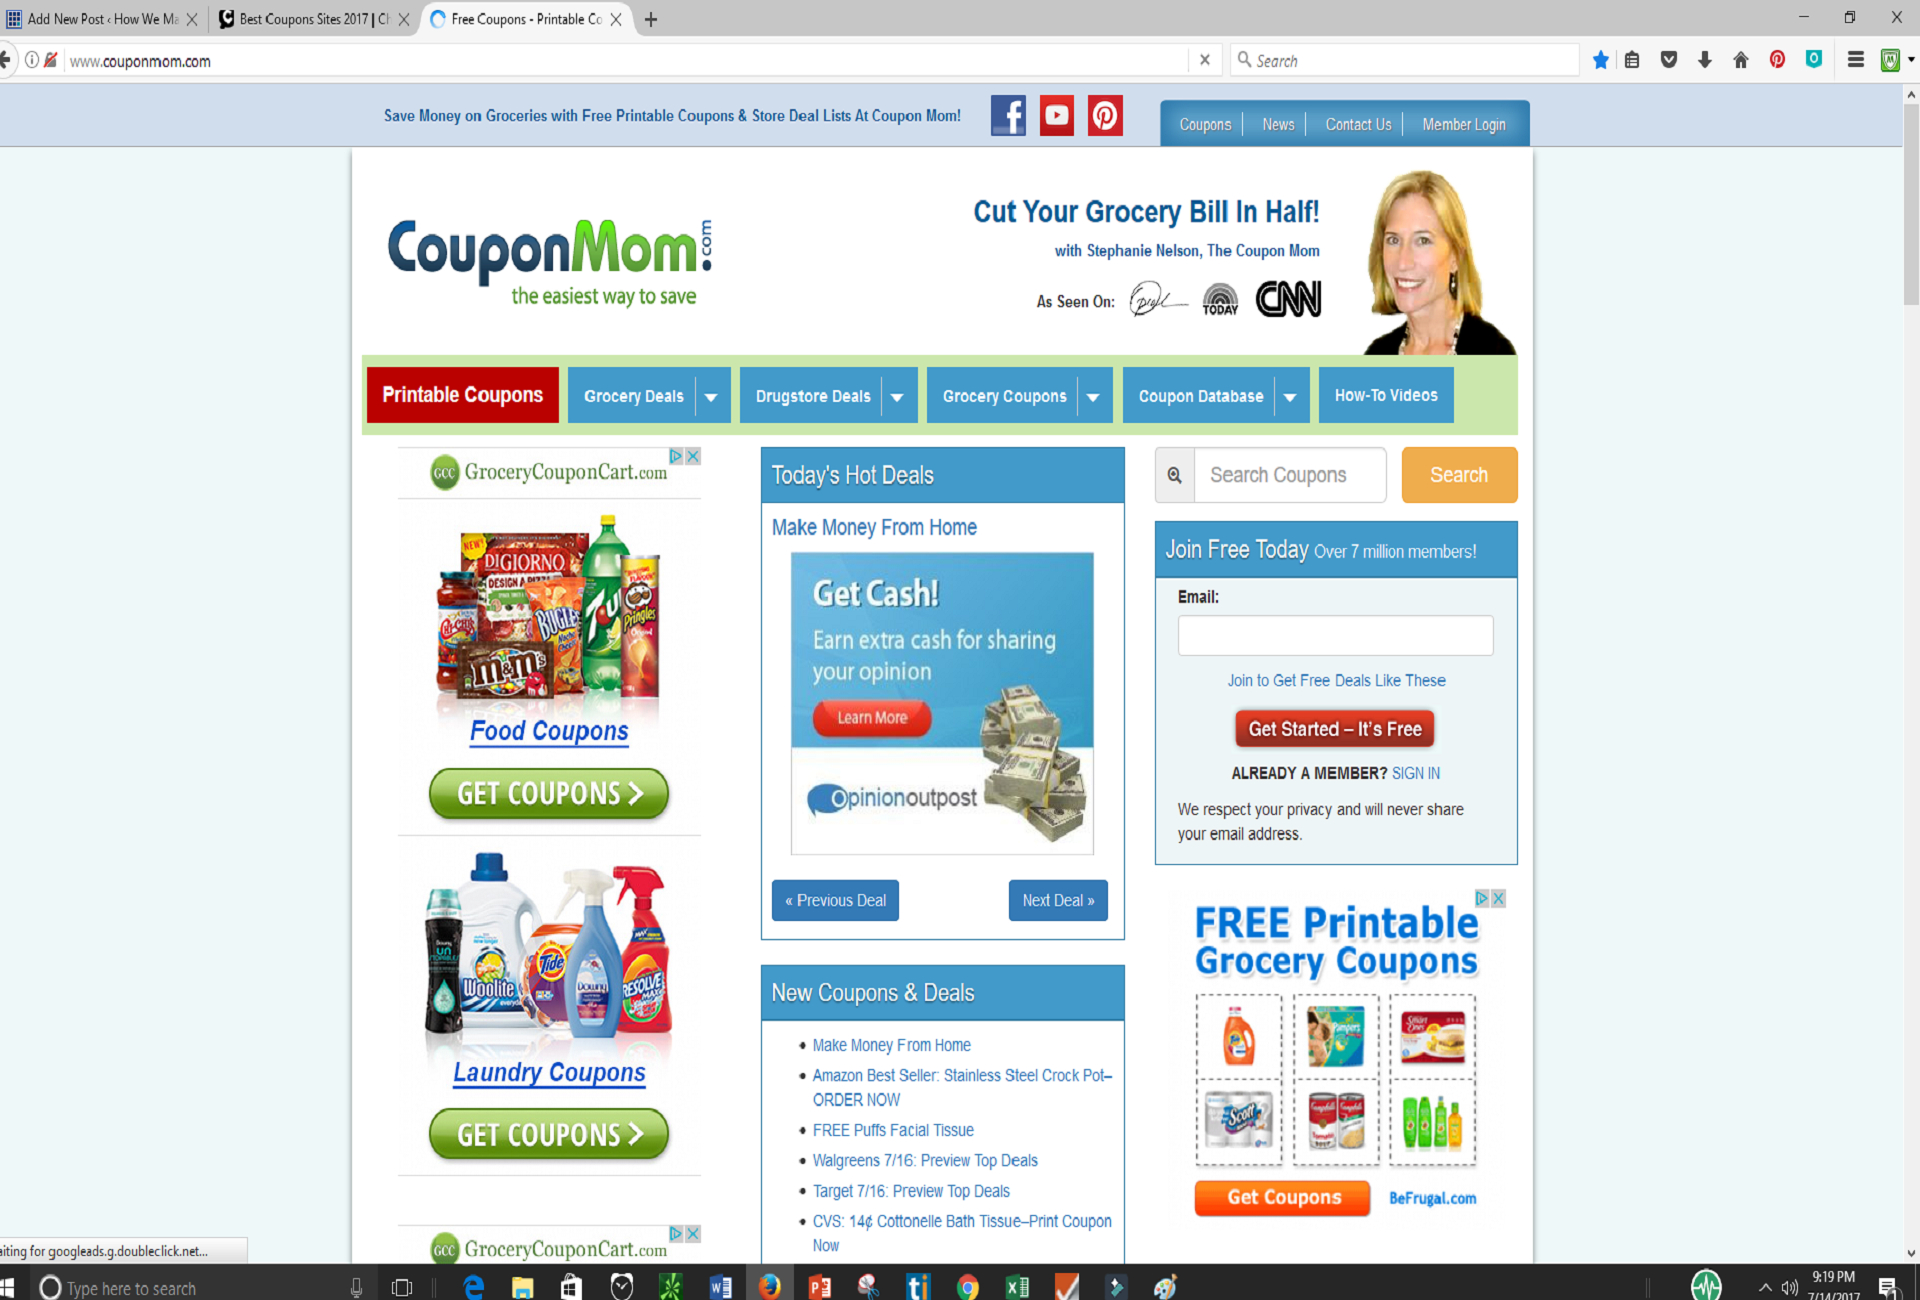 Coupons Websites With Biggest Discounts And Hot Deals In 2019 - Free Printable Coupon Websites